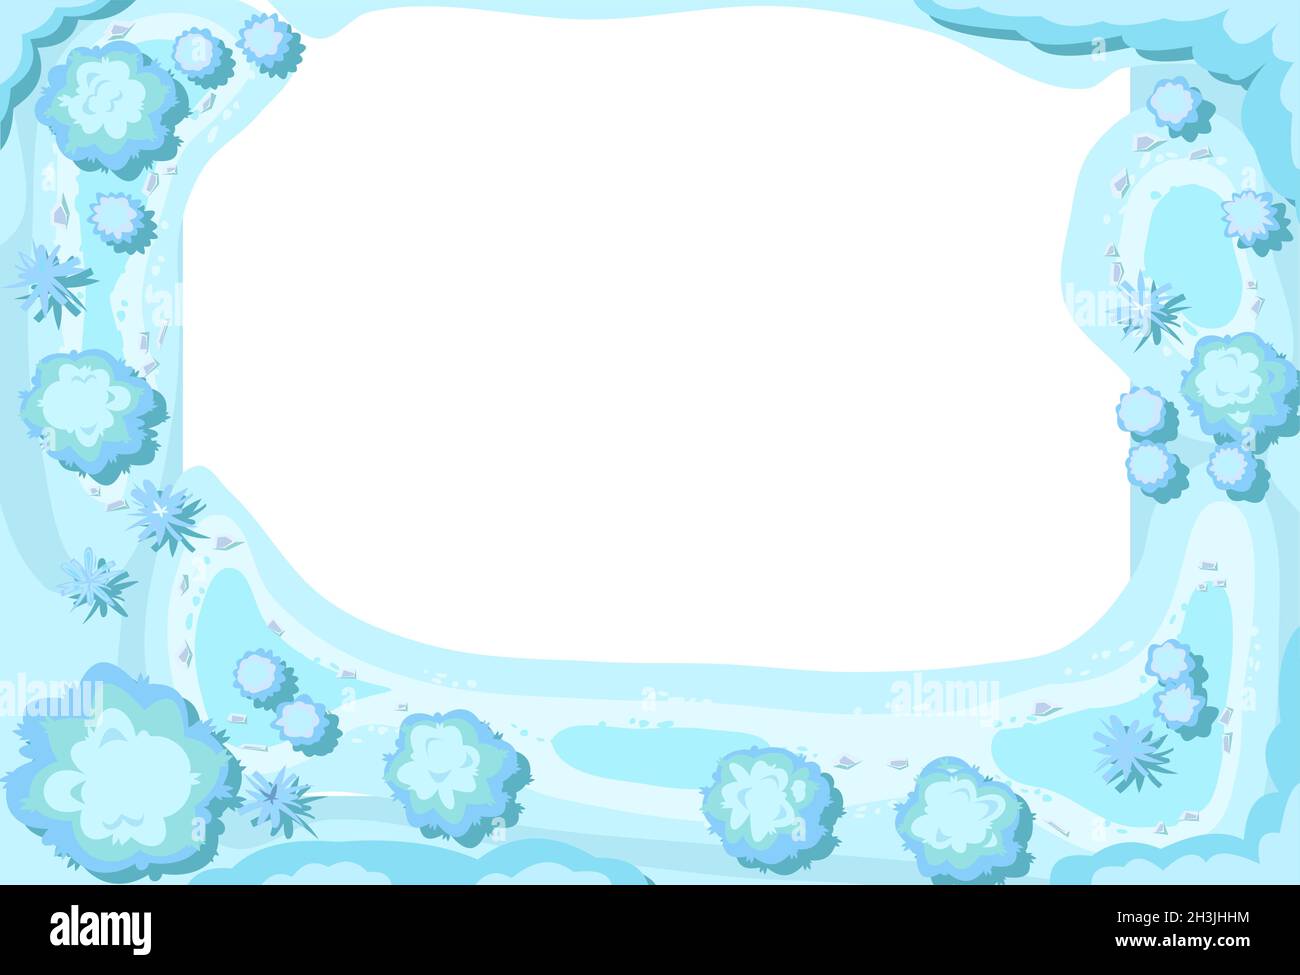 Winter landscape top view. Formless Frame around edge of image. Snowy frosty nature in cold season. From high. Drifts of snow. Illustration in cartoon Stock Vector